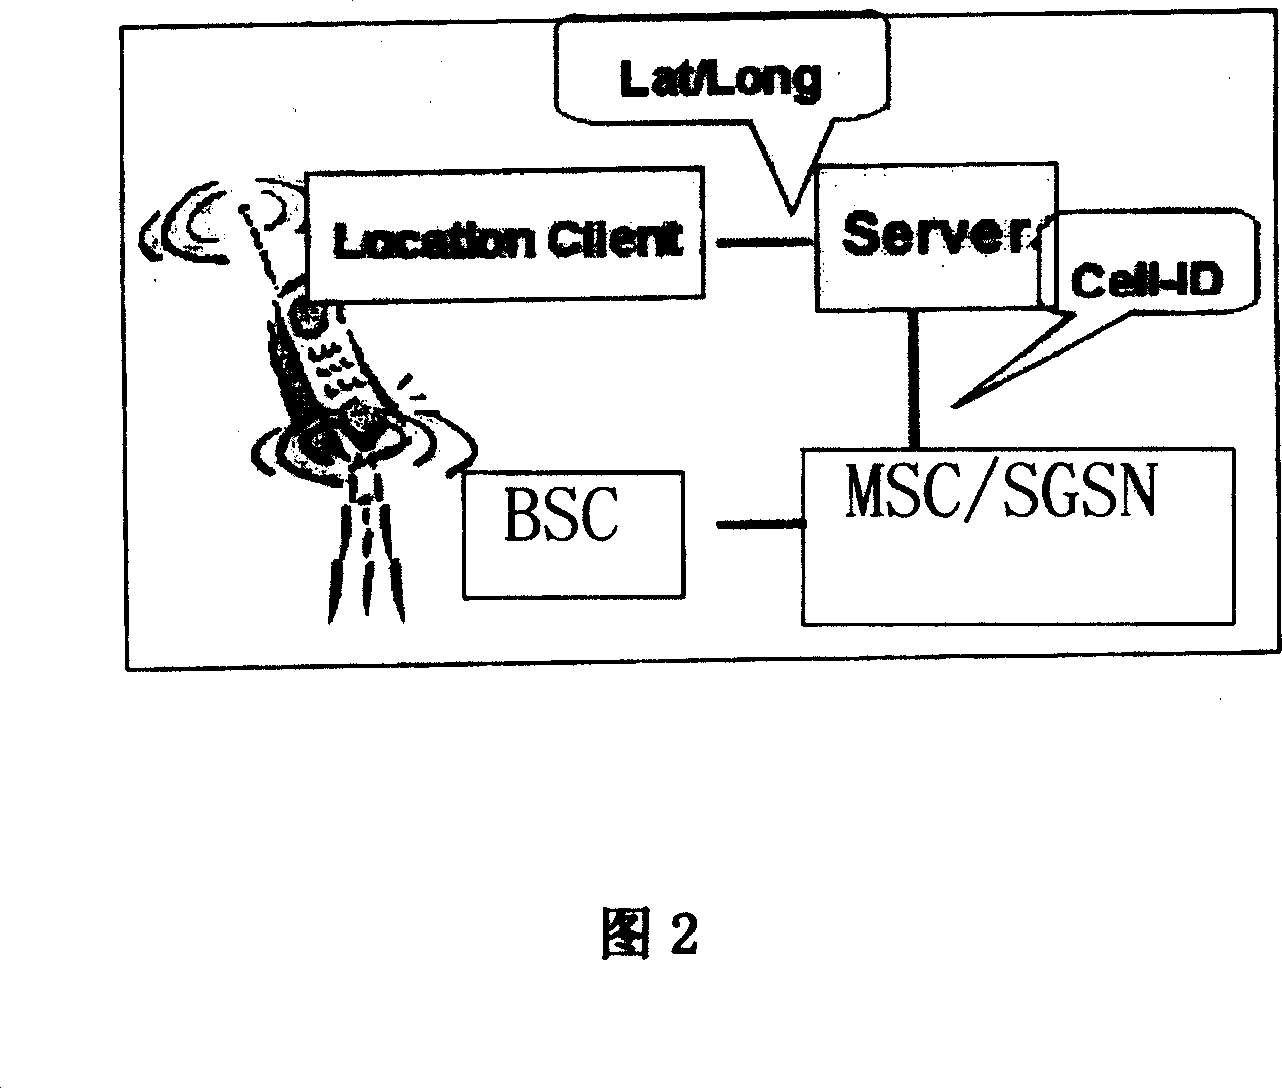 Method and apparatus for issuing mobile telecommunication information